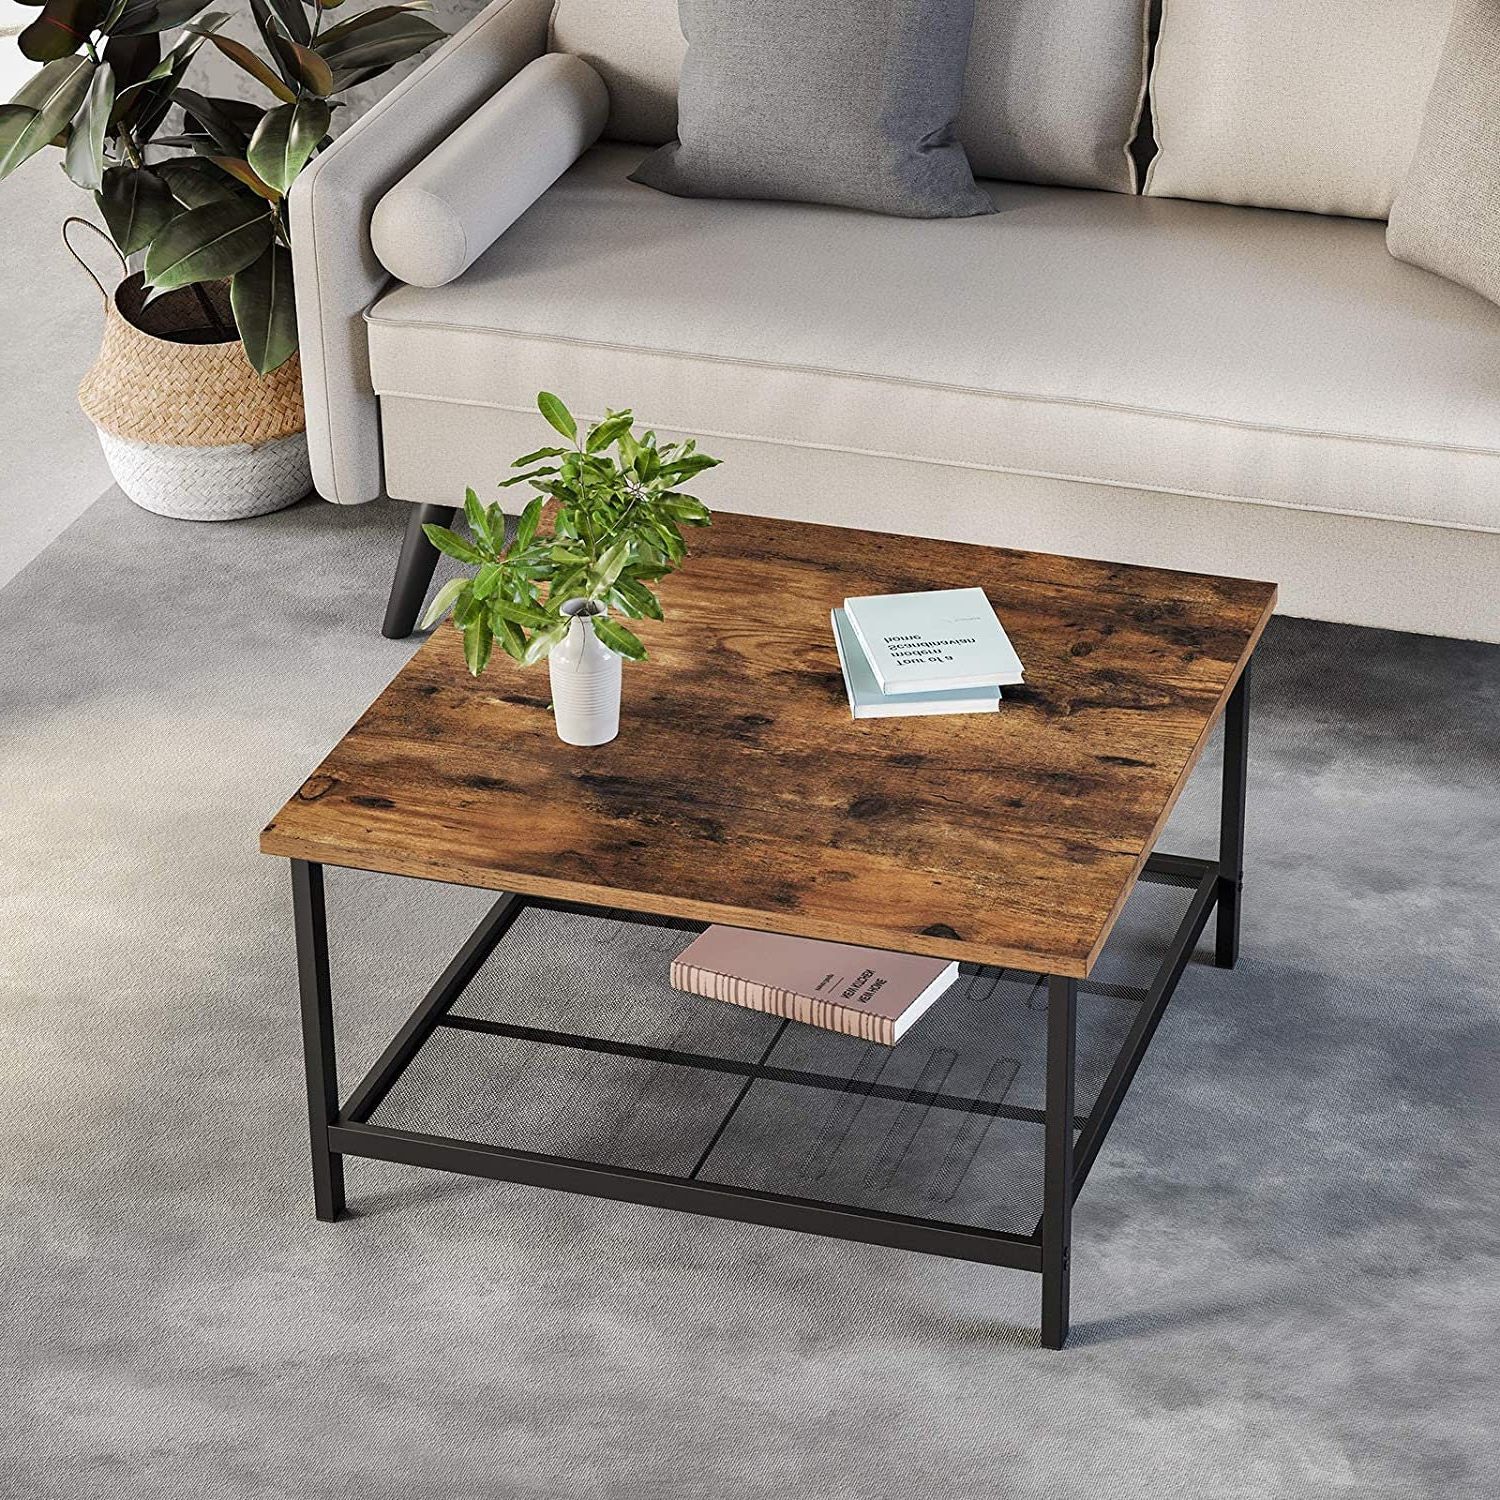 Widely Used Rustic Brown Wood Coffee Table Square Cocktail Table With (View 10 of 10)